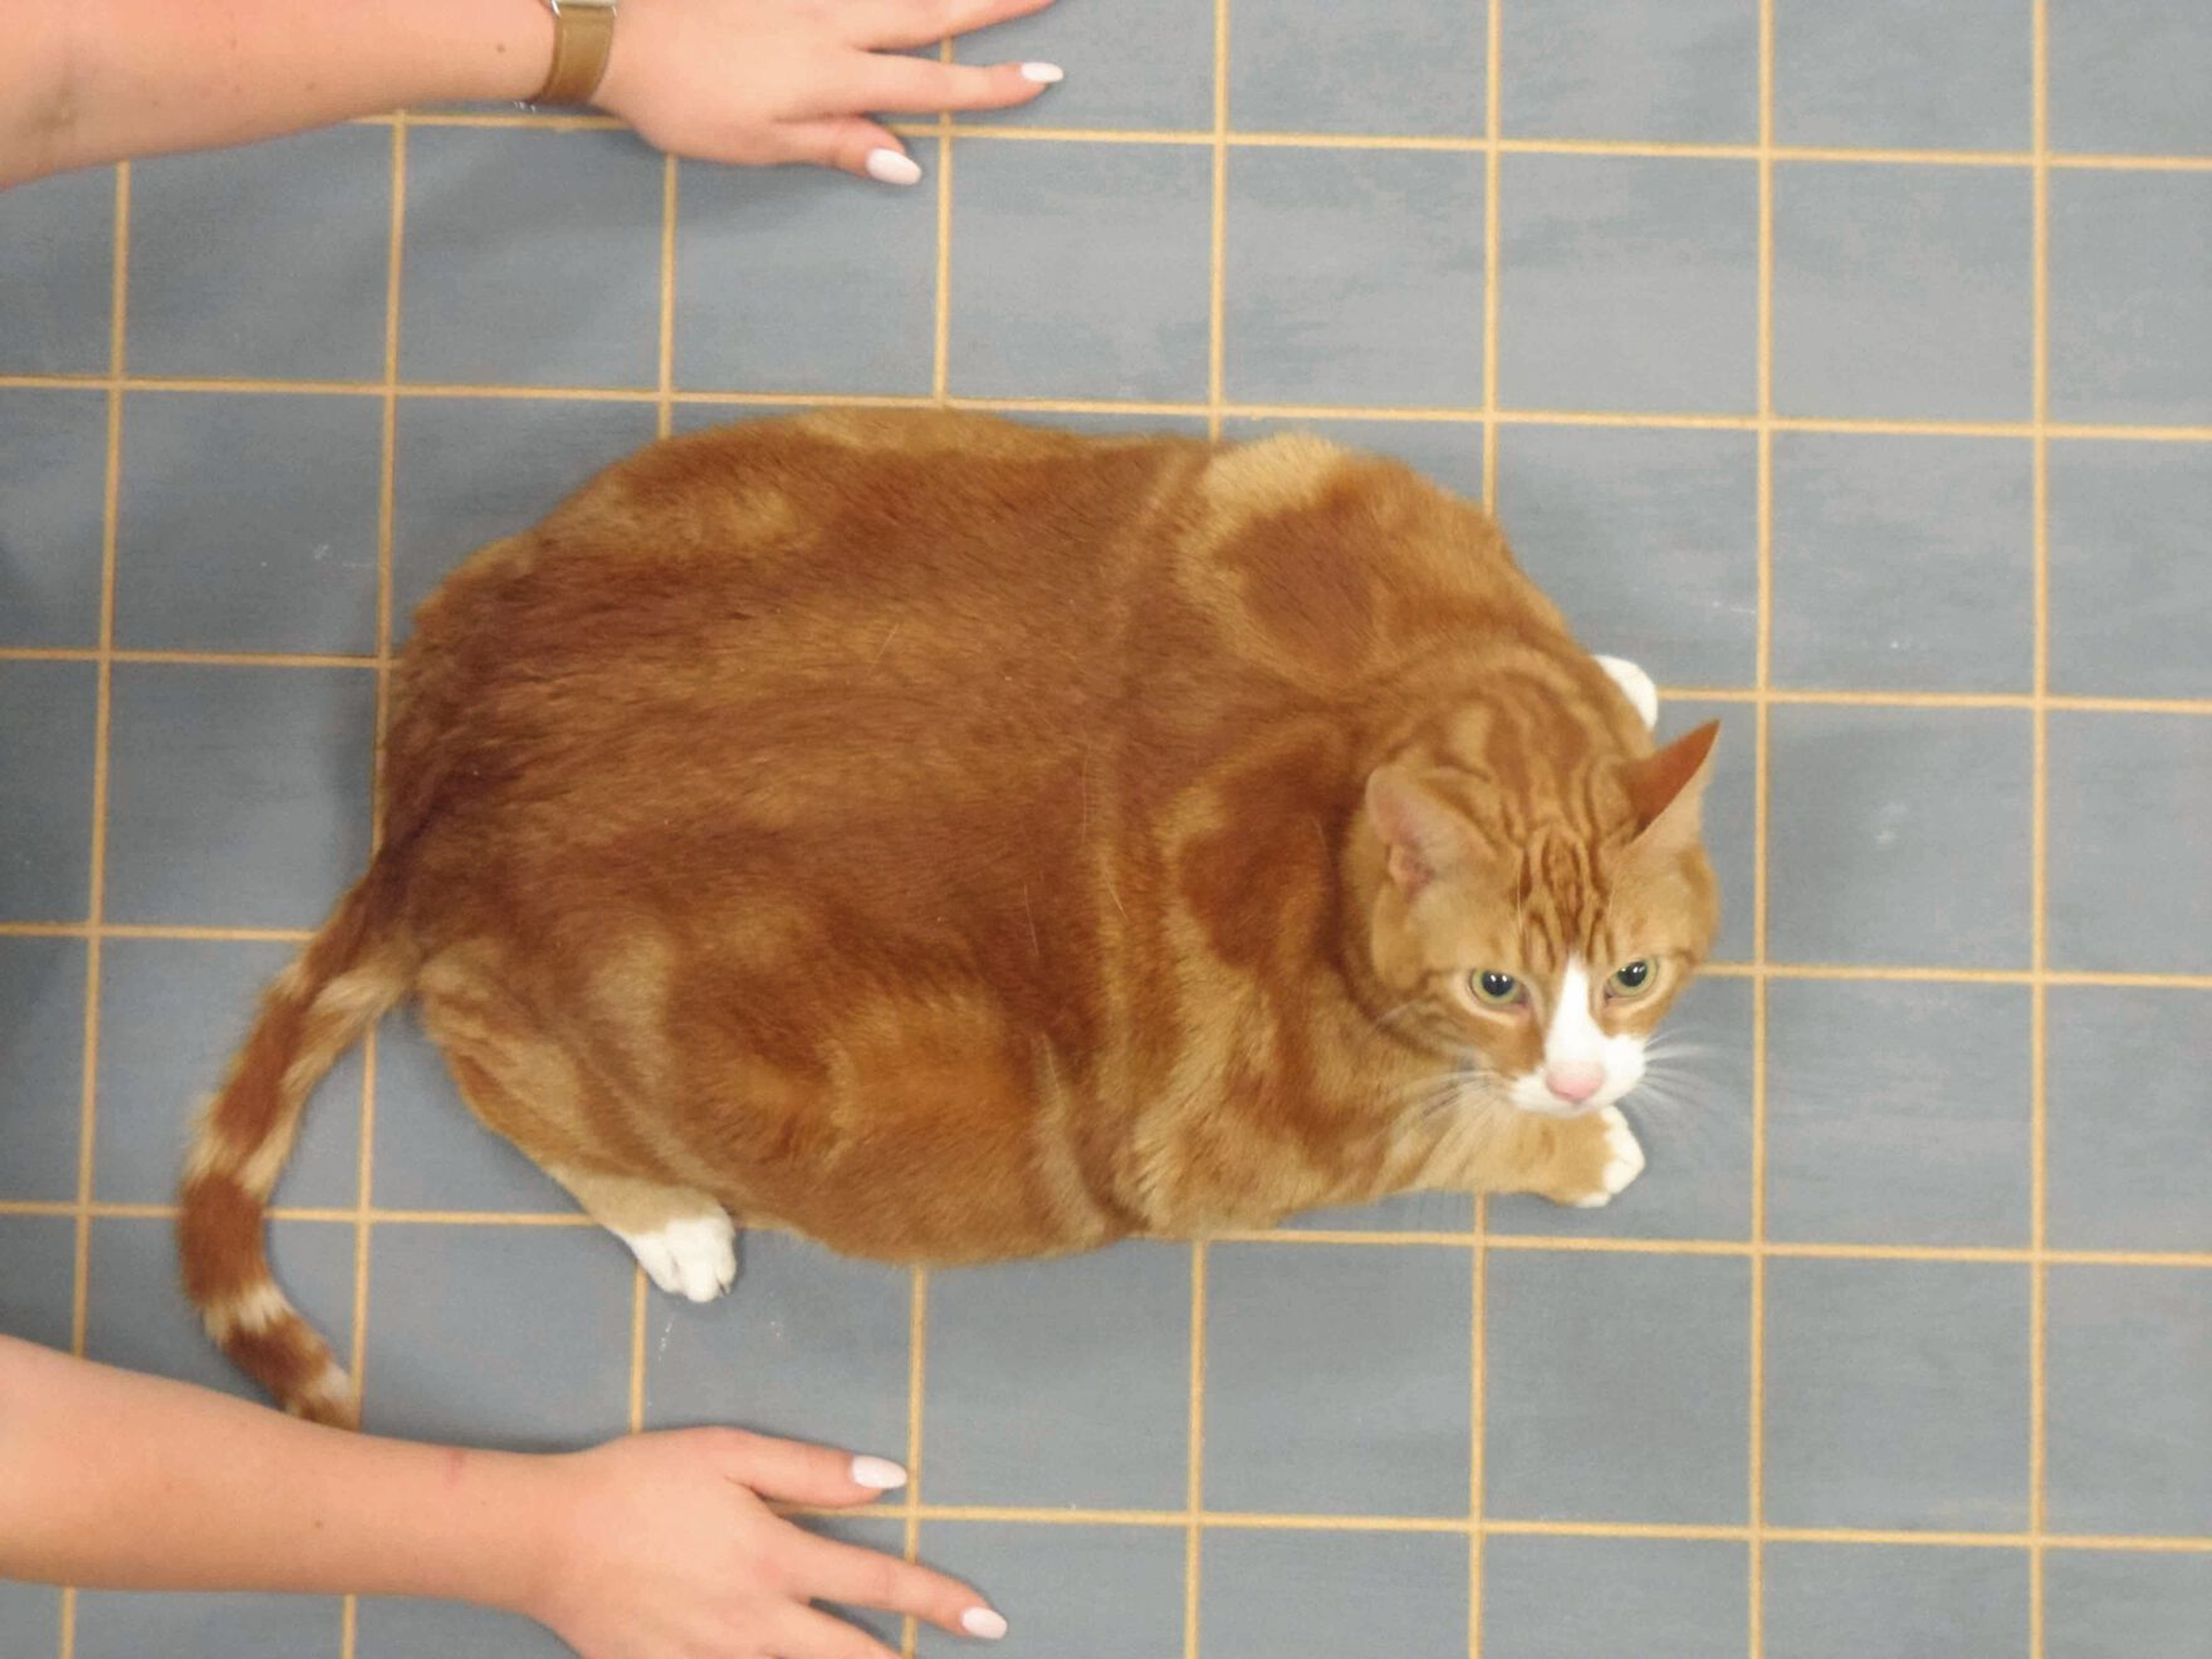 A cat (a) and dog (b) with severe obesity, which is defined as having a body condition significantly greater than 40% above their ideal weight